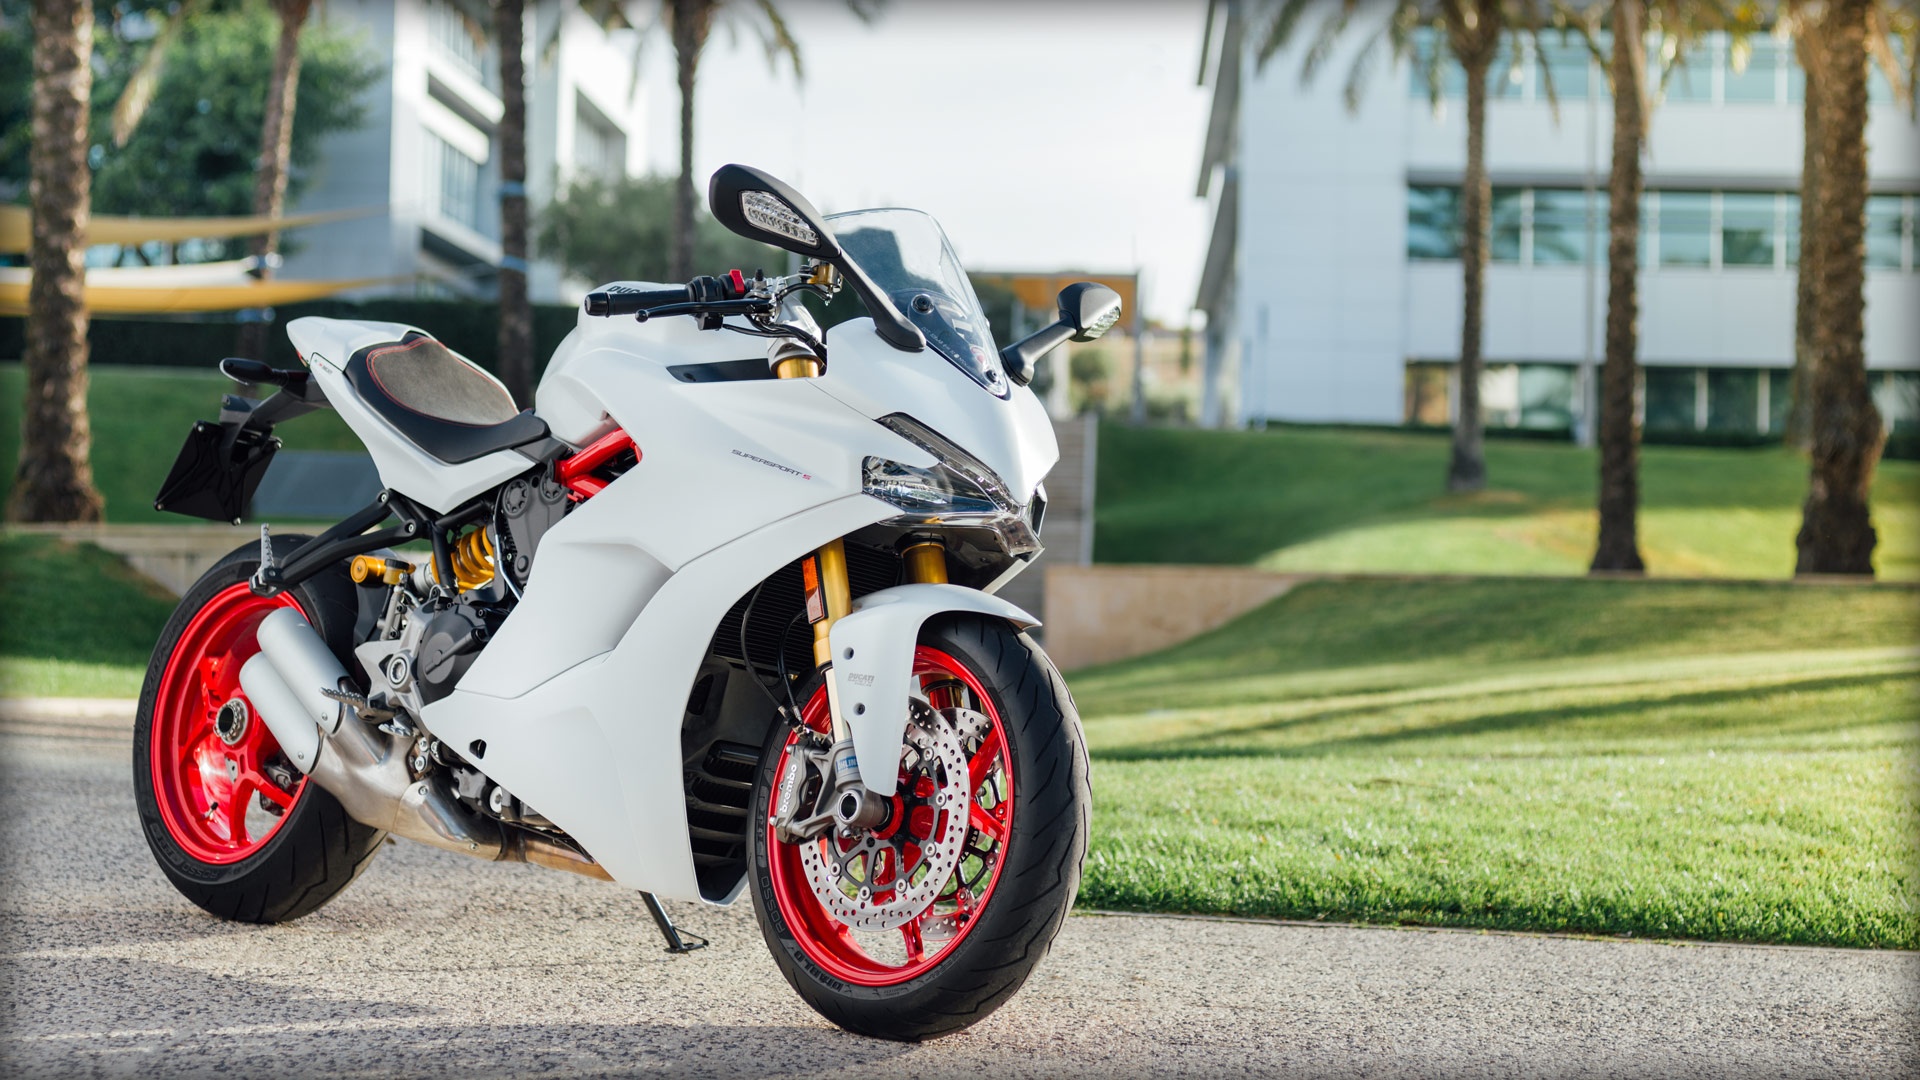 Ducati SuperSport Launched In India At Rs. 12.08 Lakhs (Ex-Showroom, India)